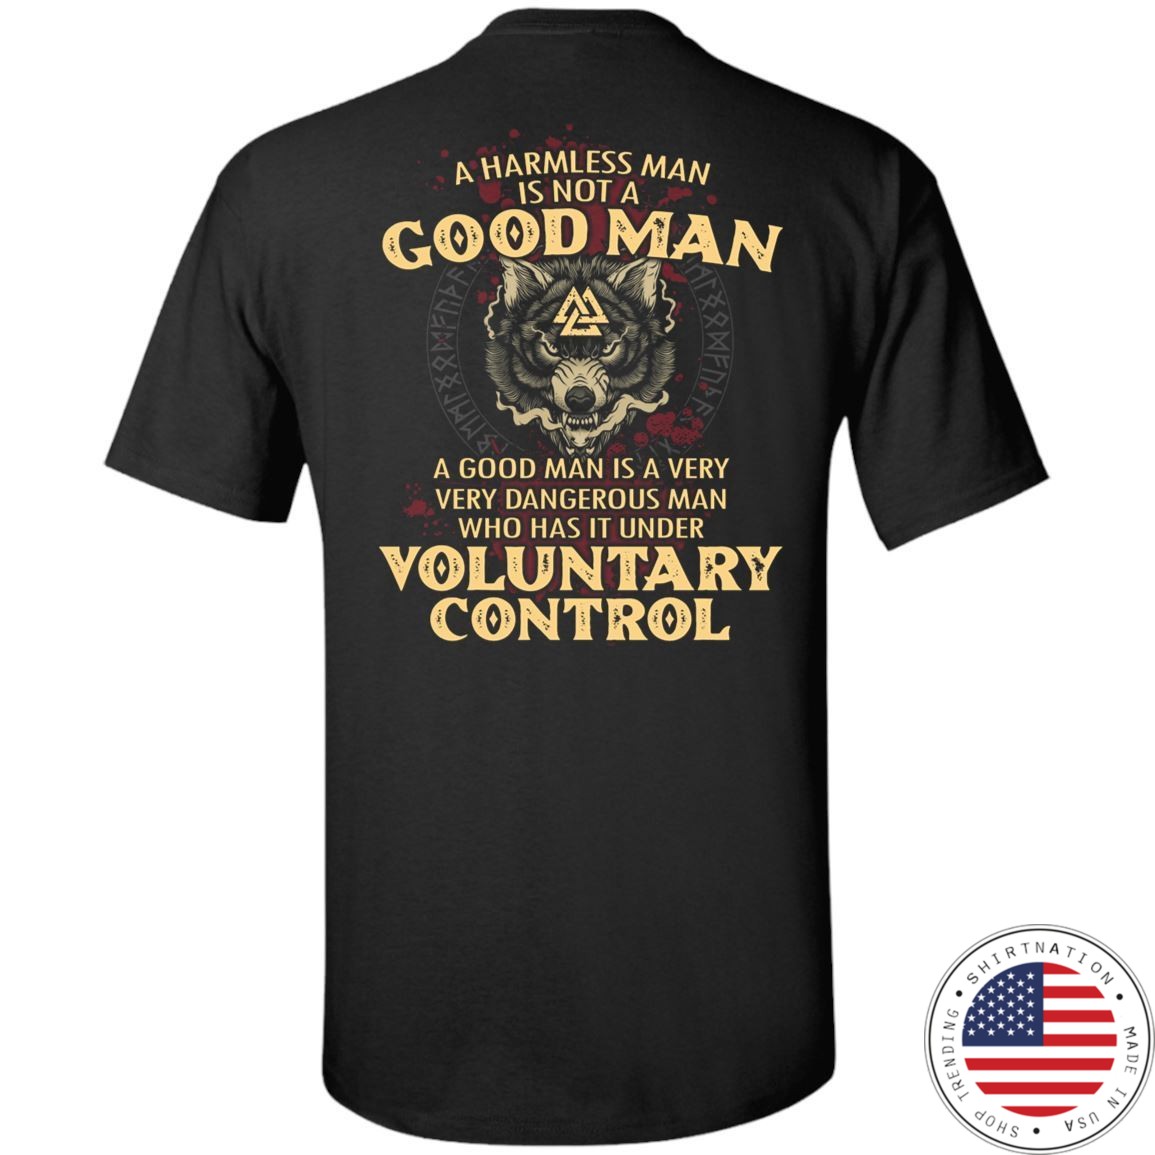 viking norse gym t shirt apparel a harmless man is not a good man backapparel heathen by nature authentic viking products tall ultra cotton t shirtblackxlt 519549 1024x1024@2x